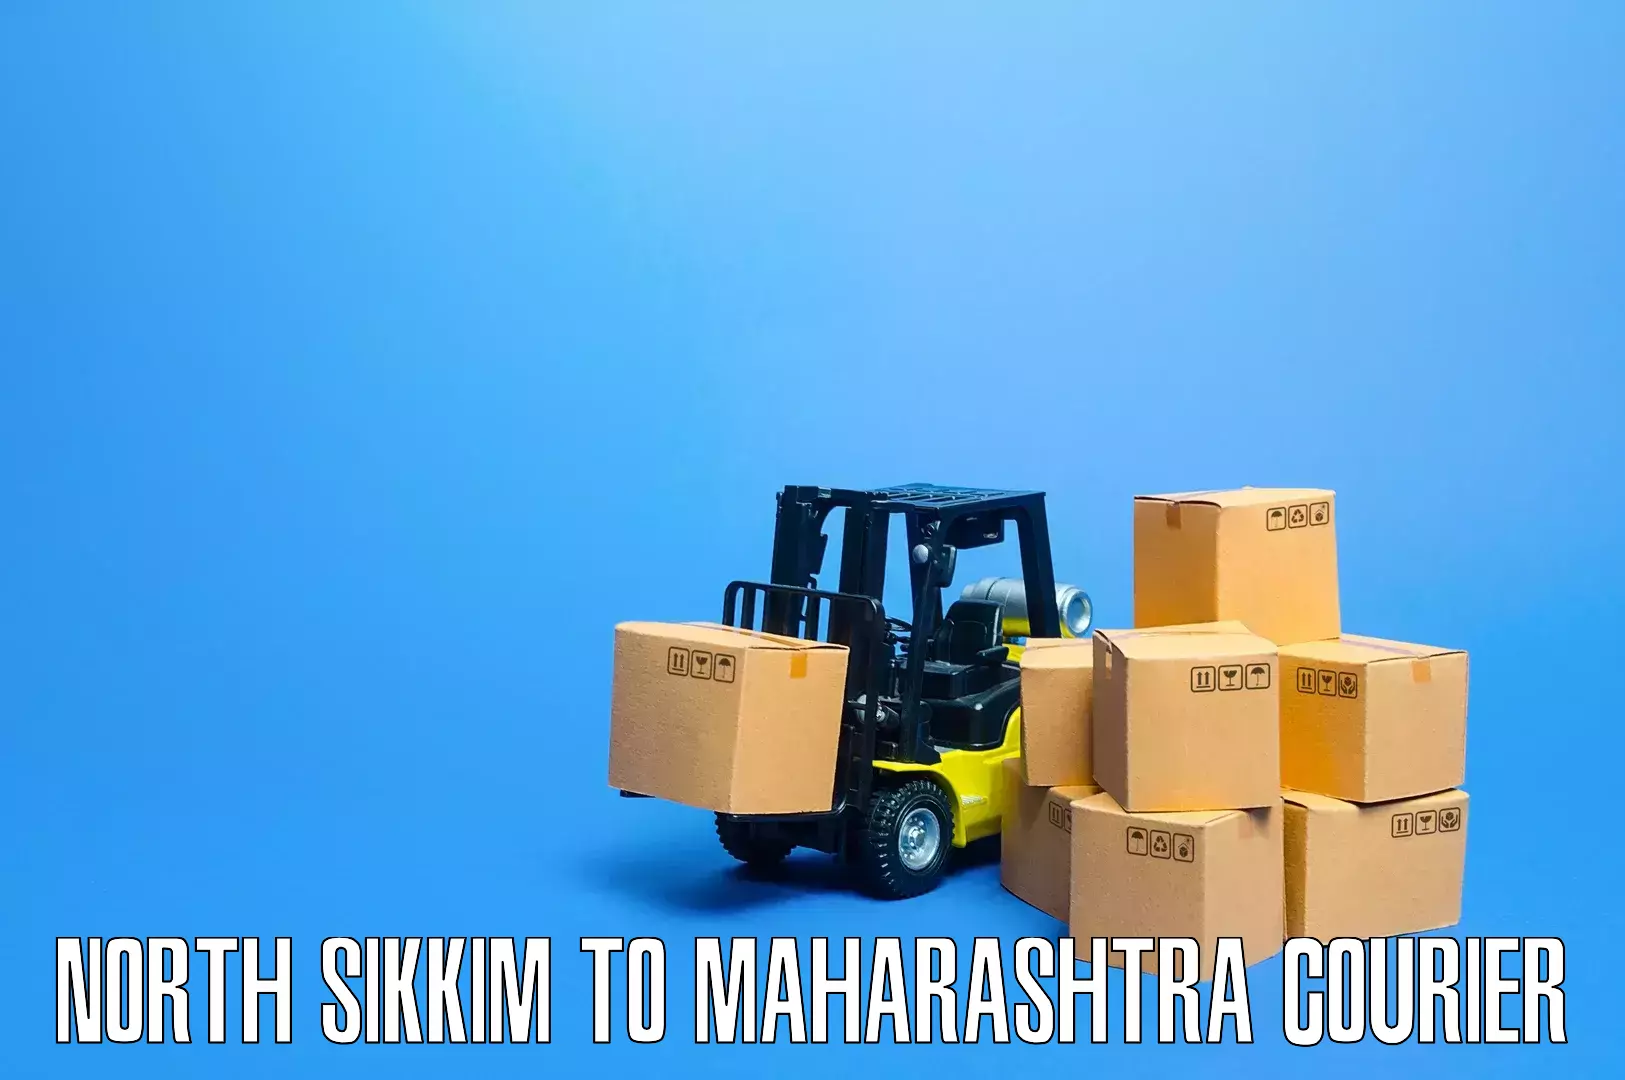 Household goods delivery North Sikkim to Mumbai Port